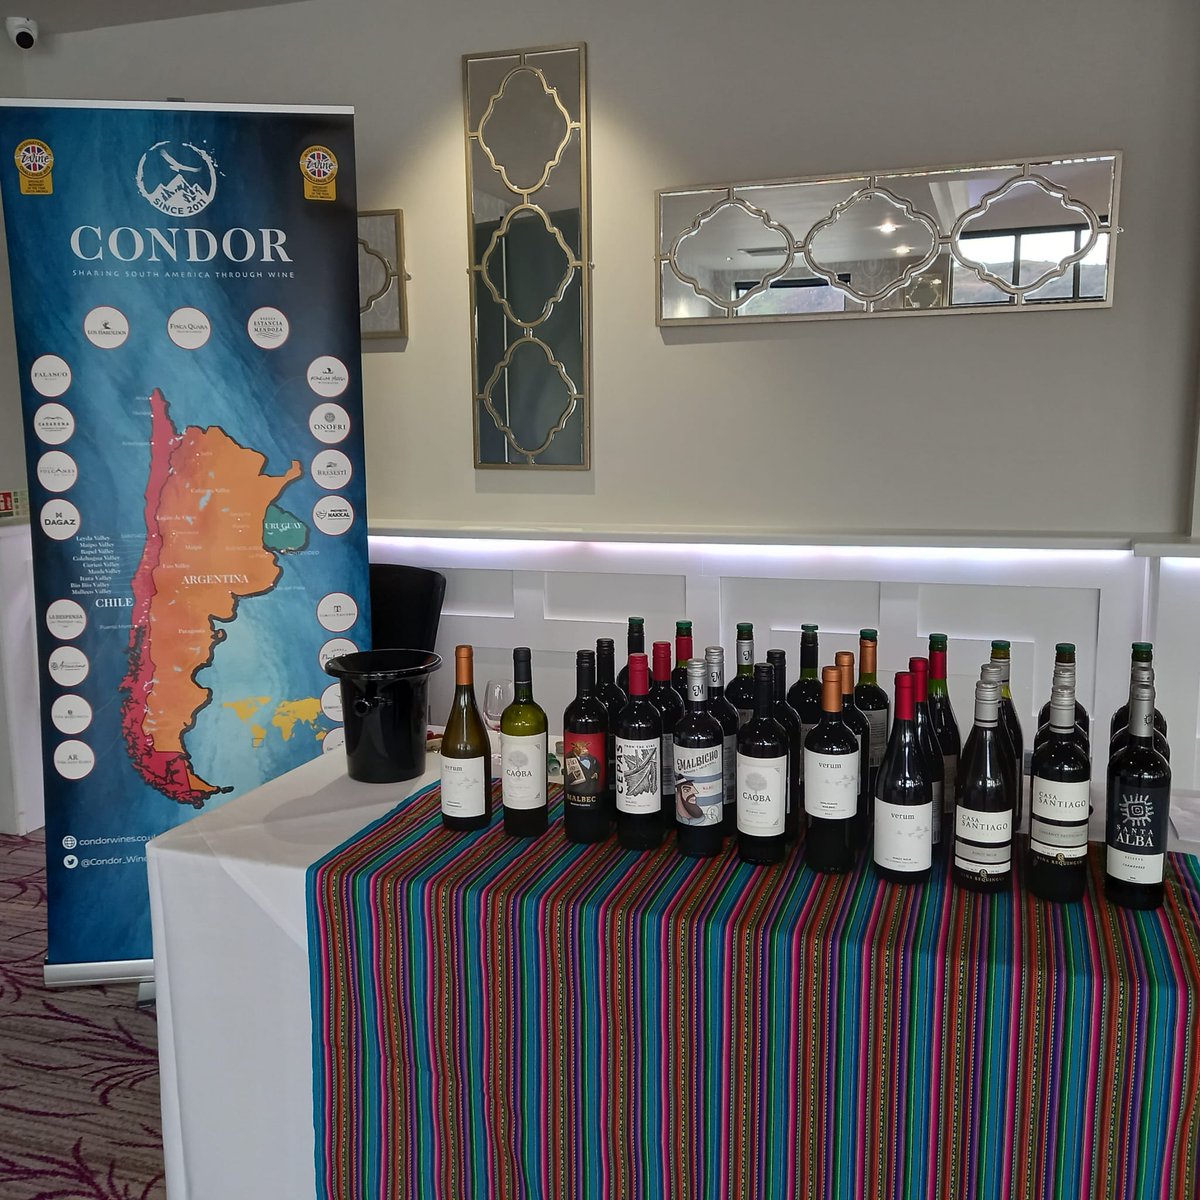 🚗 Condor on Tour! 🚗

Had a fantastic day today at Ffarm Vintners 🤩

Thanks to everyone who attended and said such nice things about our wines 😊

@BodDelRioElorza @VinaRequingua

#condorontour #condorwines #importer #wine #winetasting #winesofargentina #southamericanwines